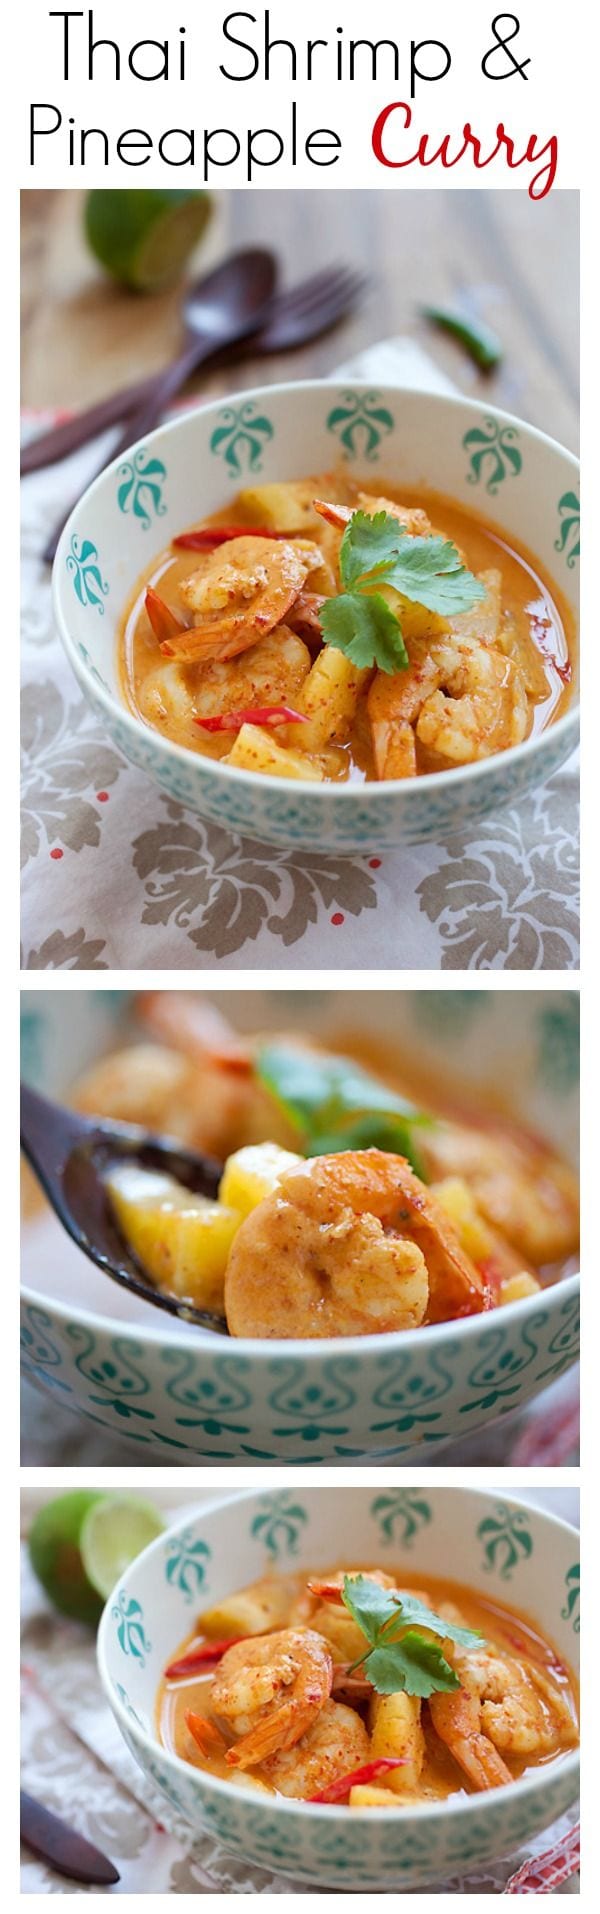 Thai Shrimp & Pineapple Curry - shrimp & pineapple are the best combos for this amazing and super delish curry. Takes 15 minutes to make | rasamalaysia.com